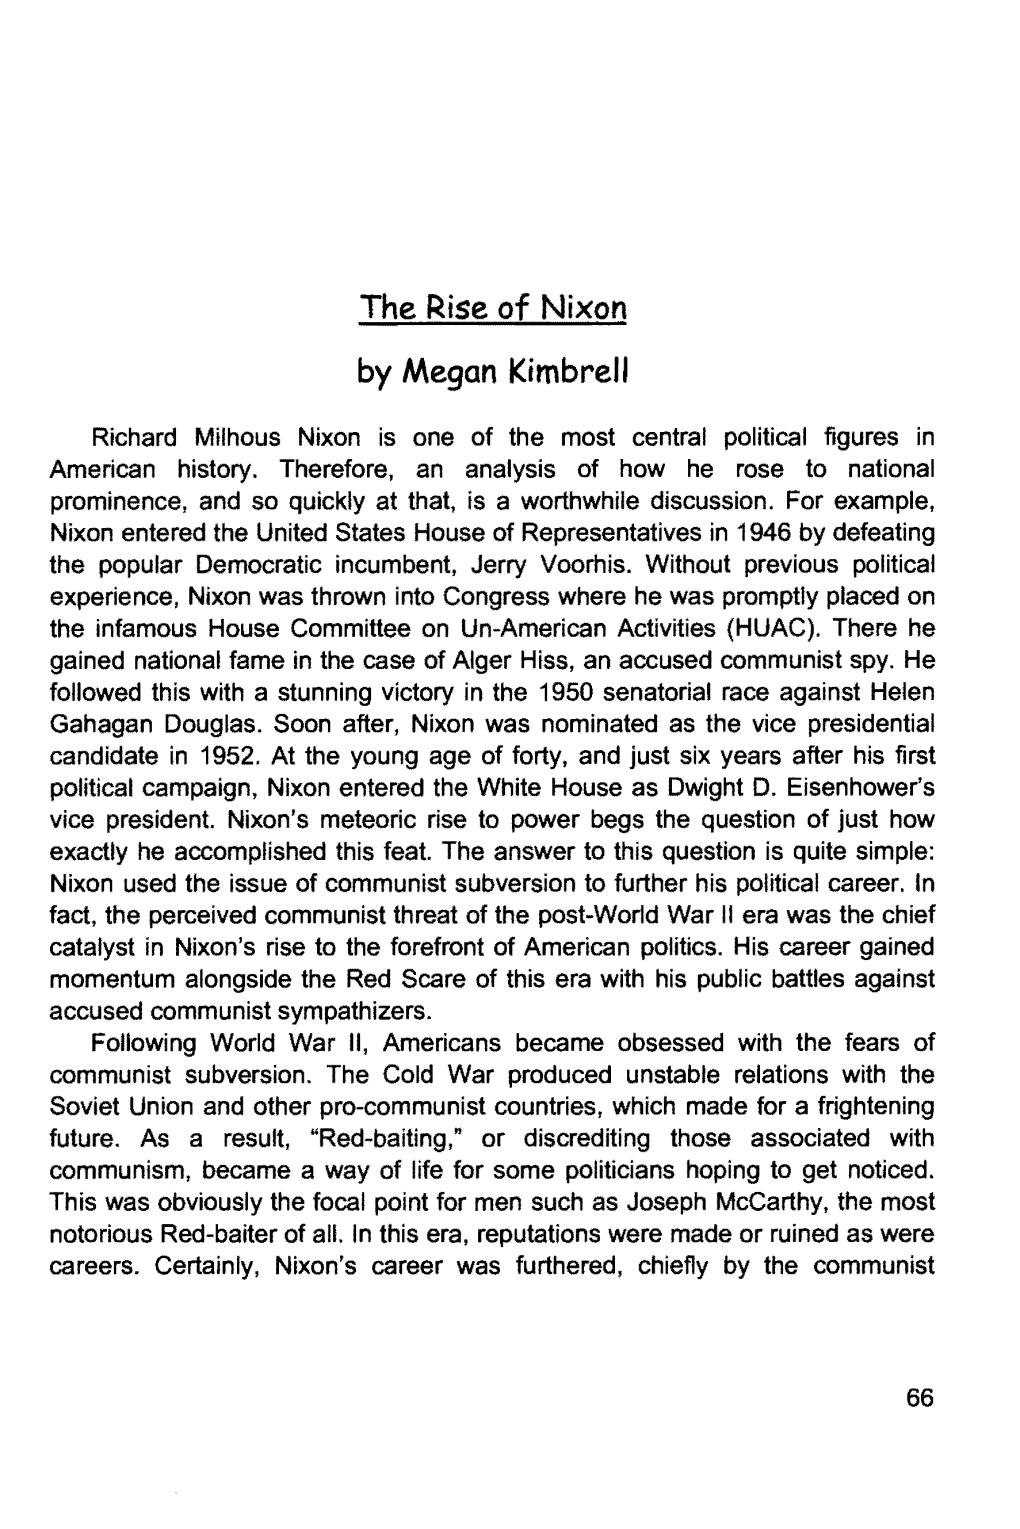 The Rise of Nixon by Megan Kimbrell